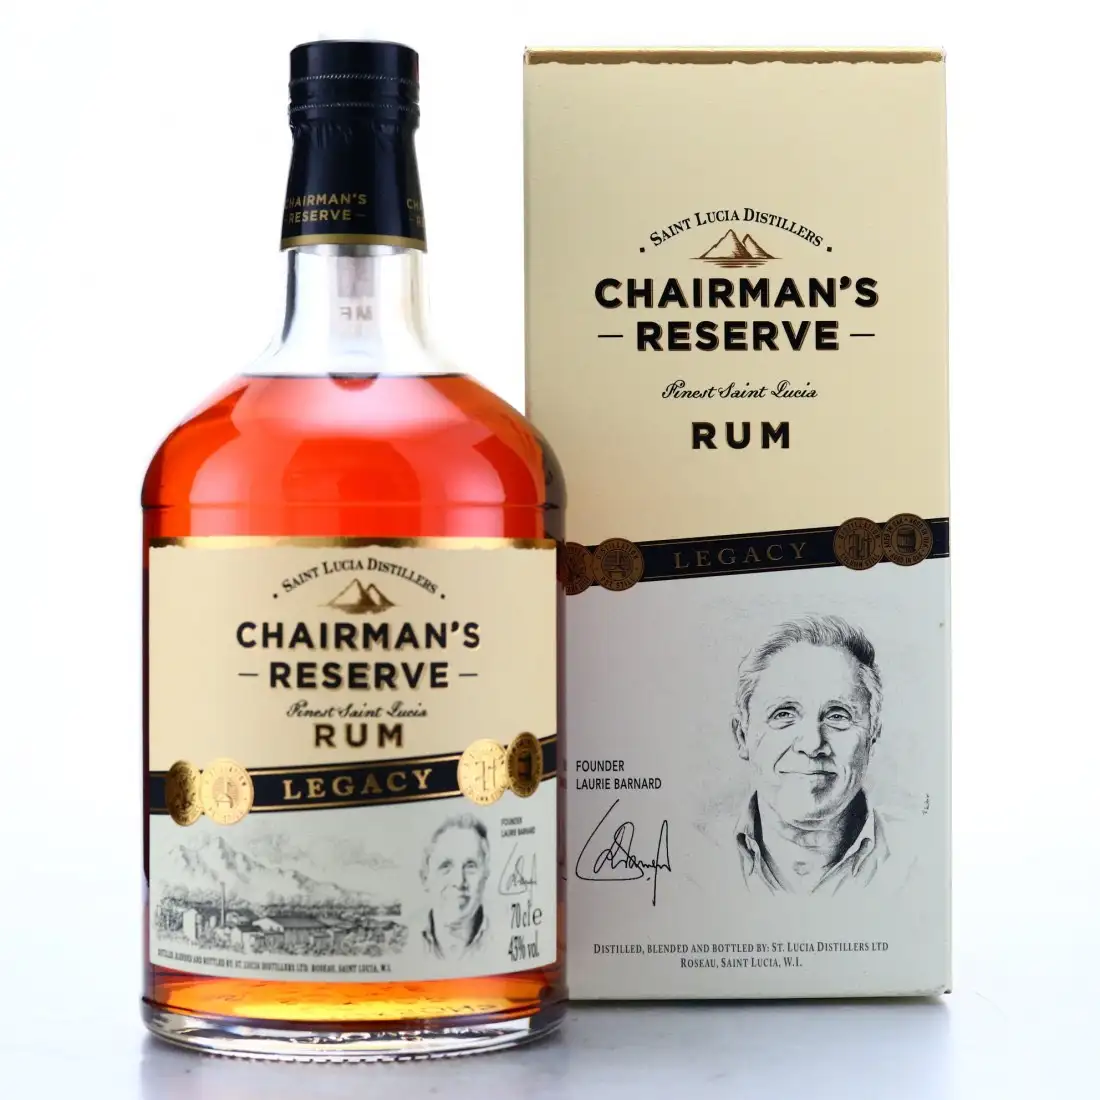 Image of the front of the bottle of the rum Chairman‘s Reserve Legacy